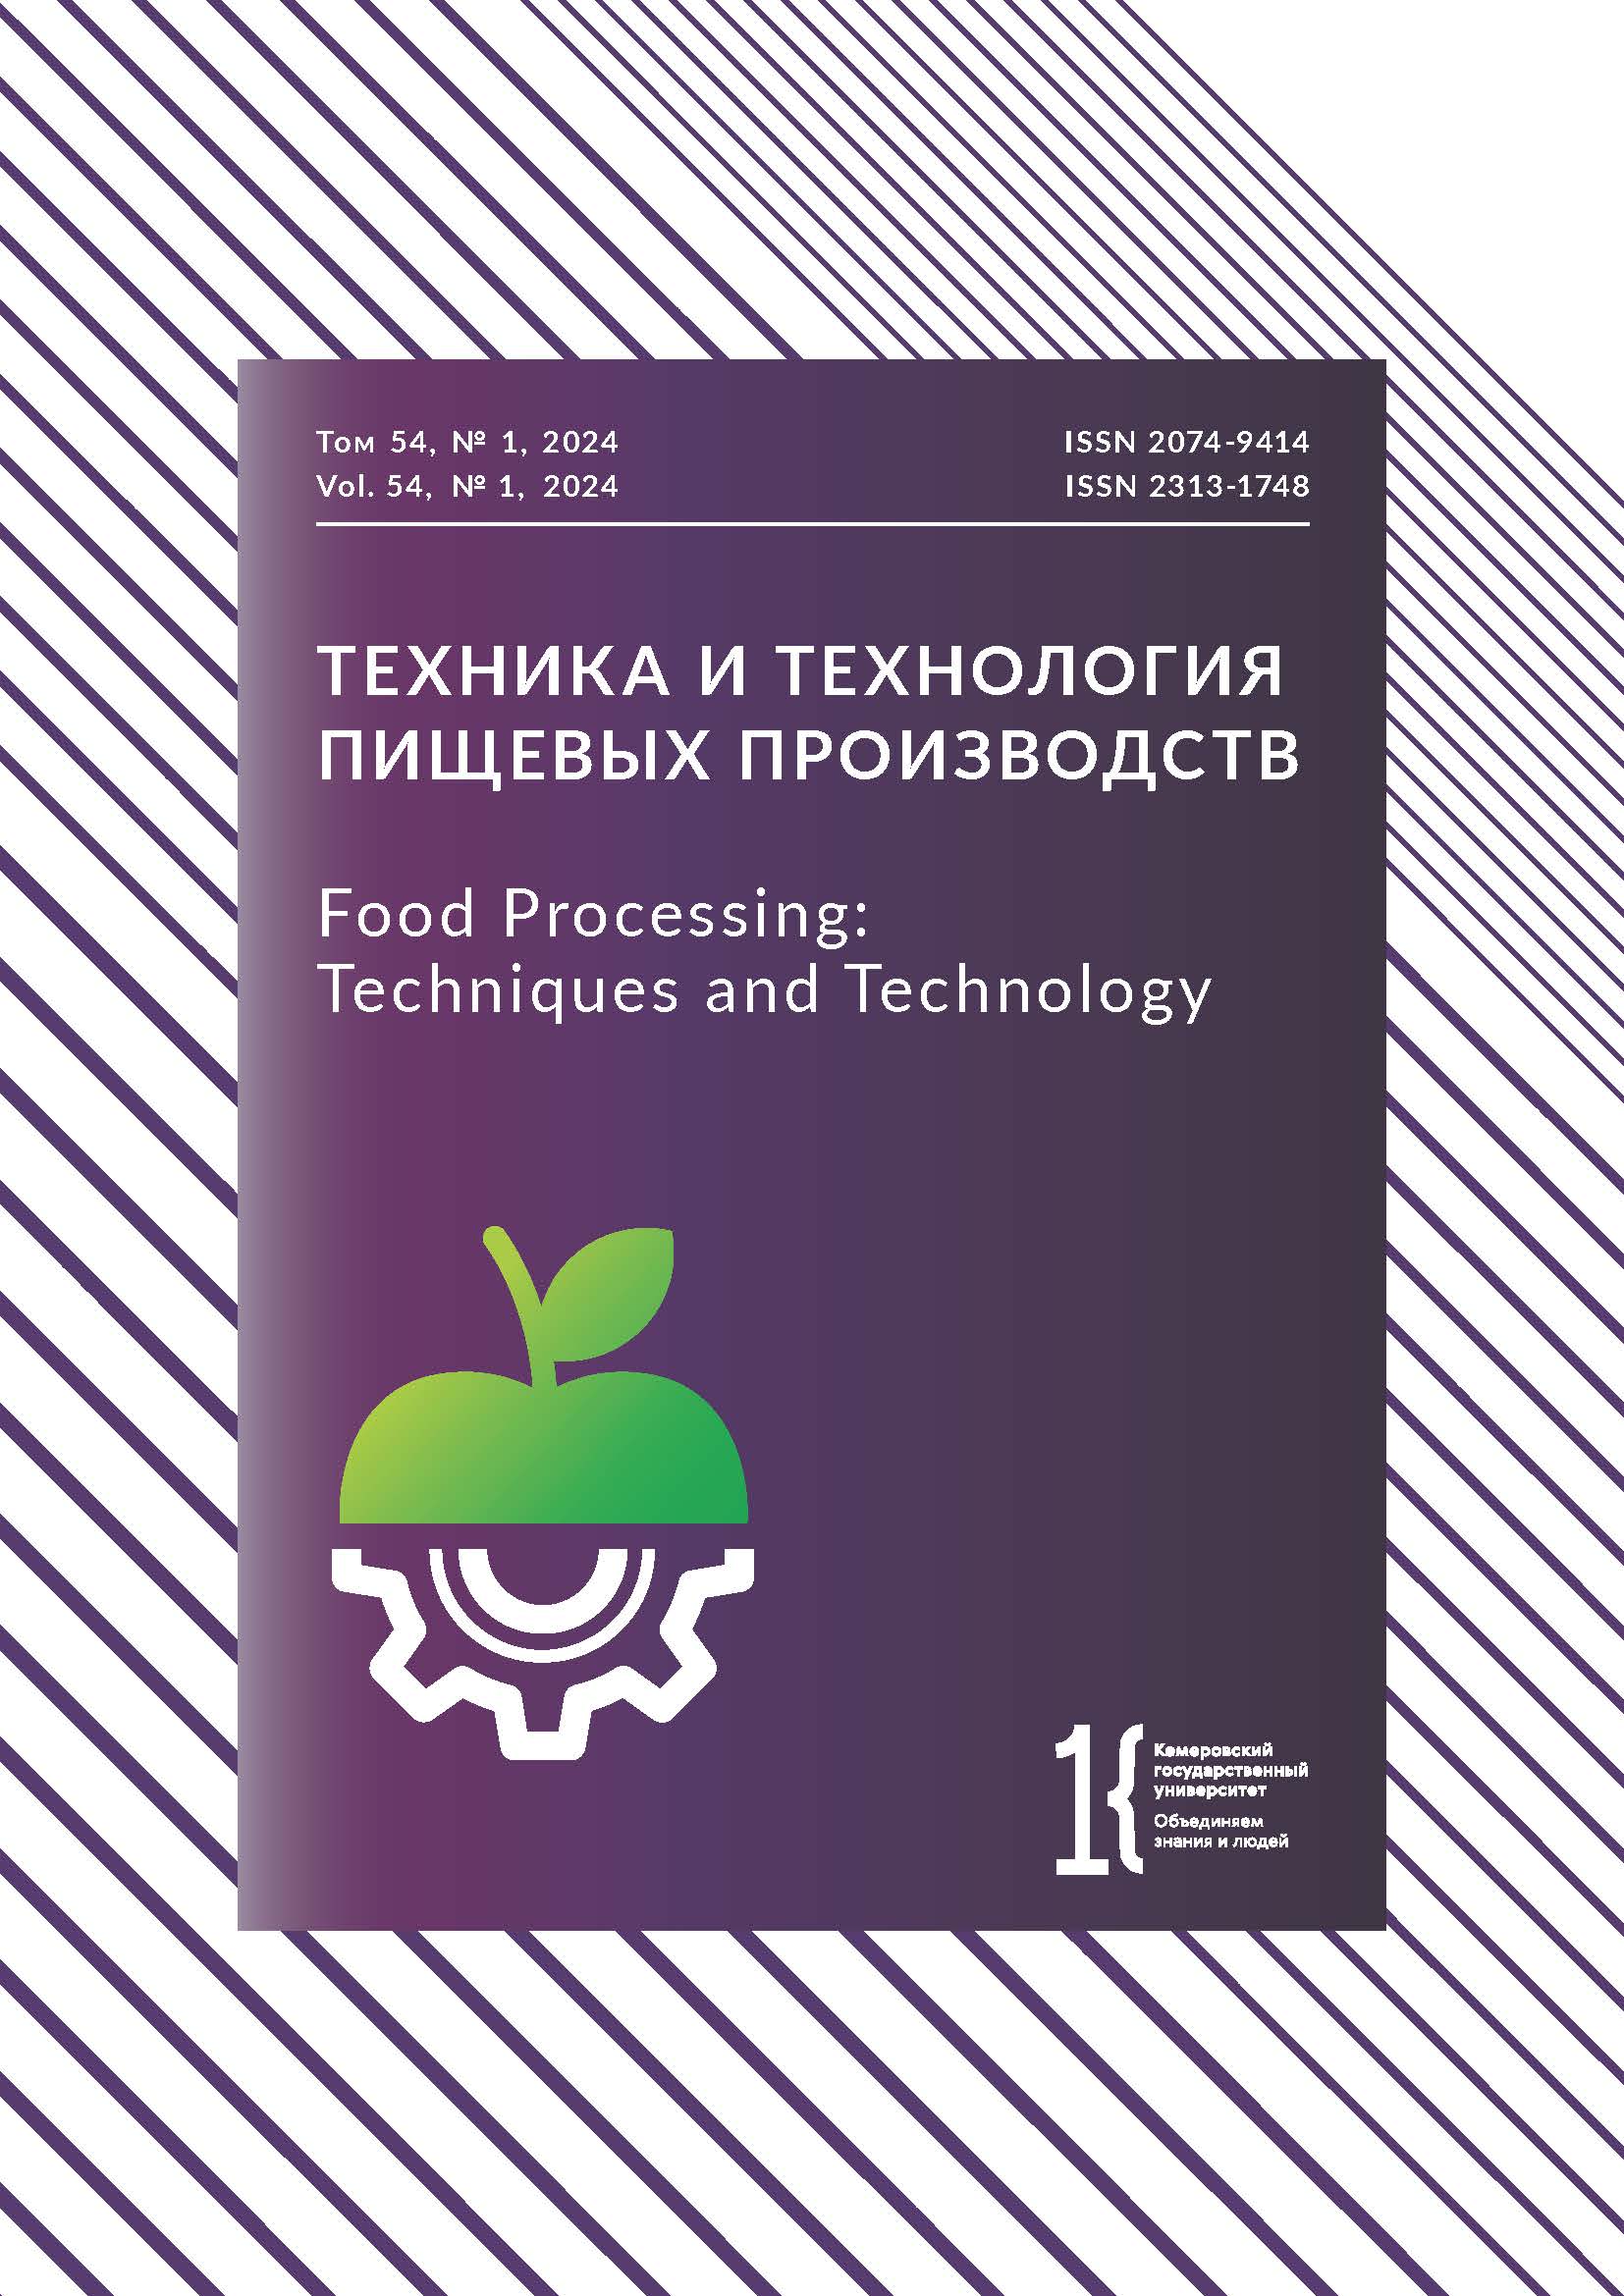                         Food Processing: Techniques and Technology
            